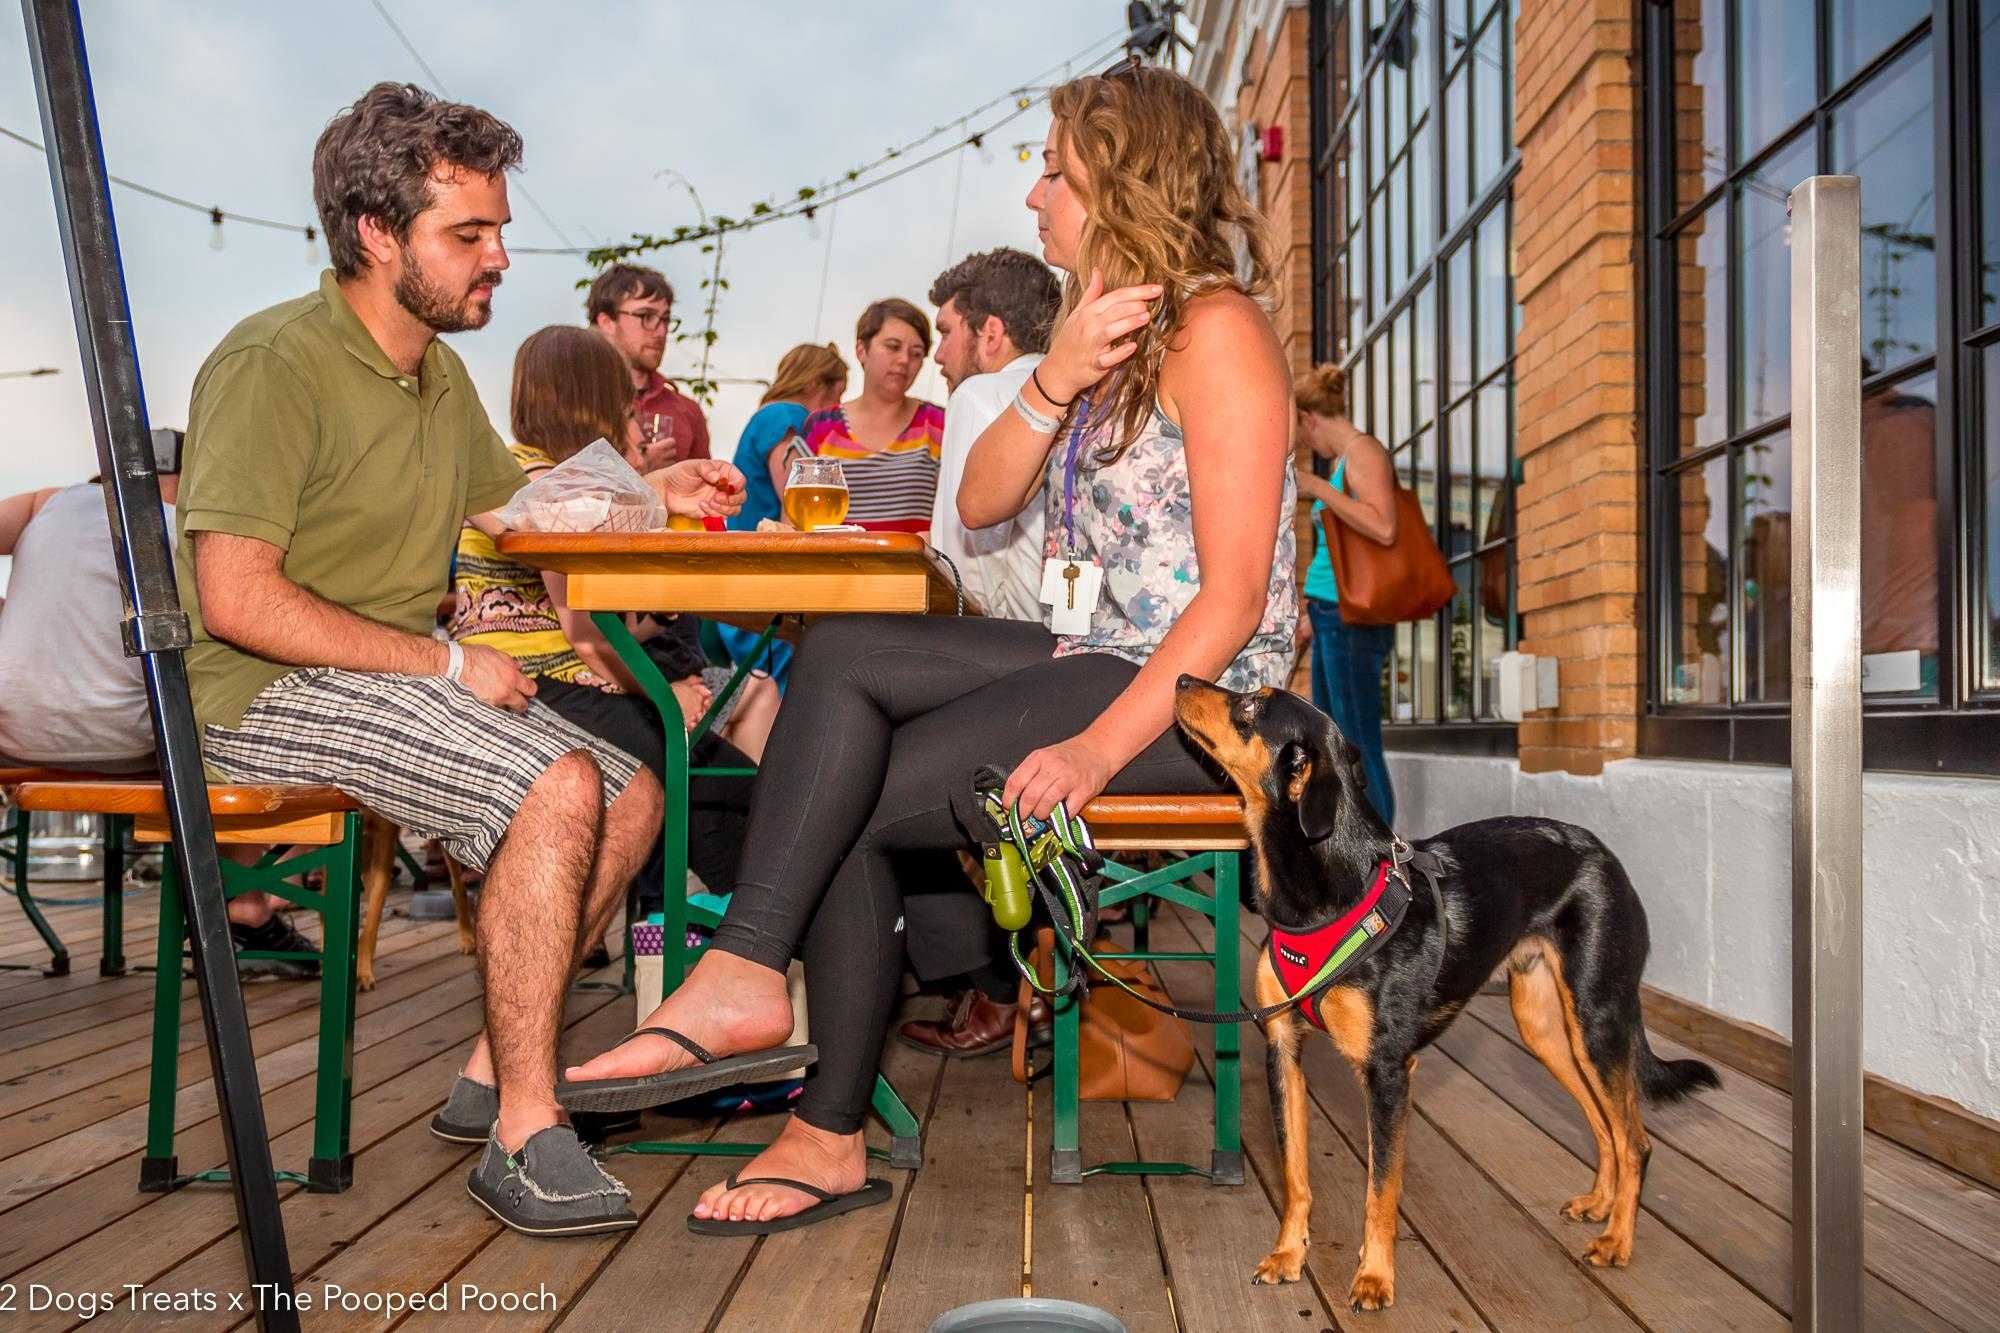 Your Summer Guide to Dog-Friendly Events Across the USA